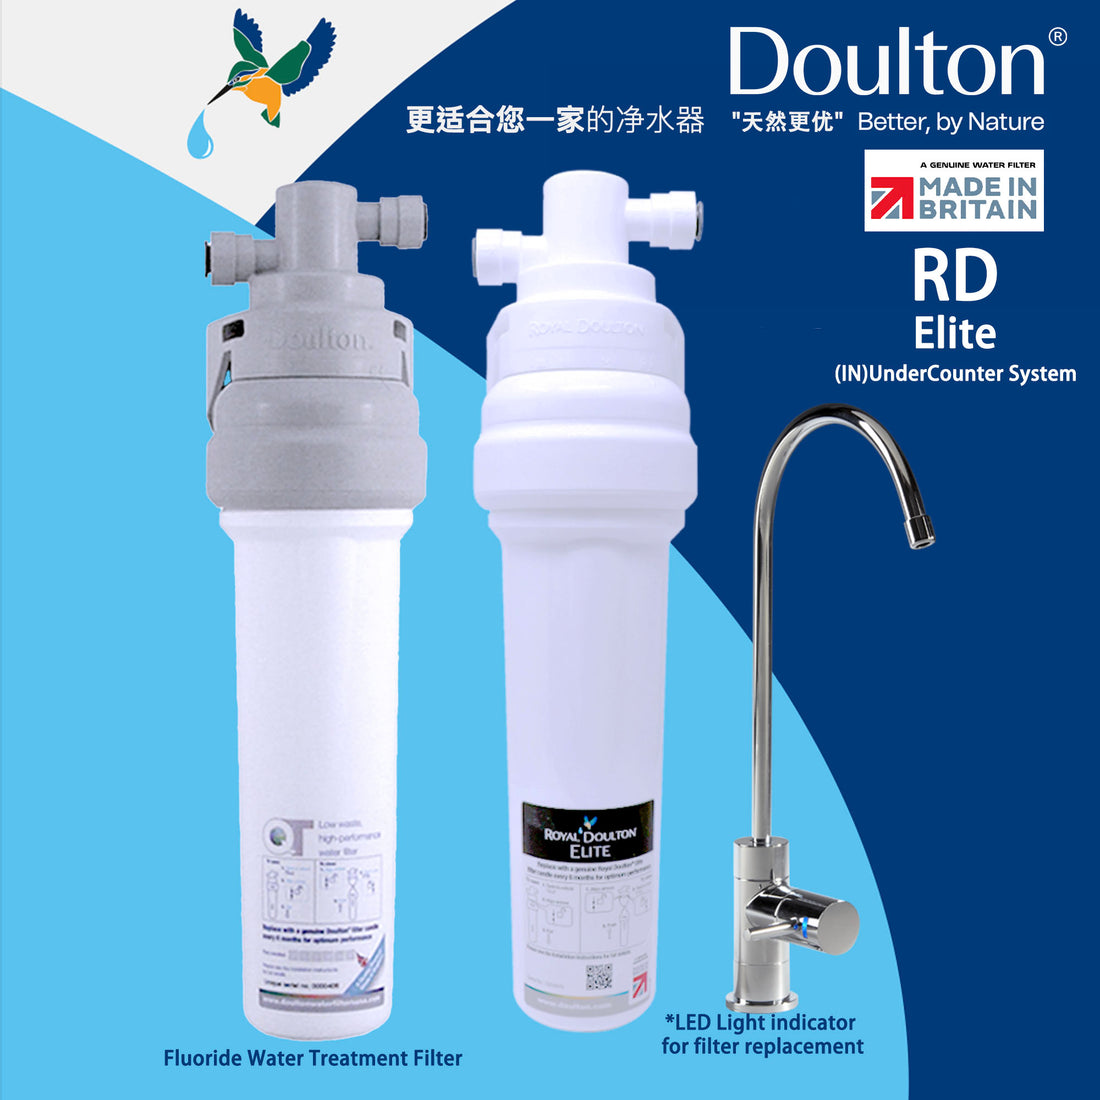 Royal Doulton Elite advanced premium drinking water purifier system, Optimized for significant reduction of fluoride in drinking water